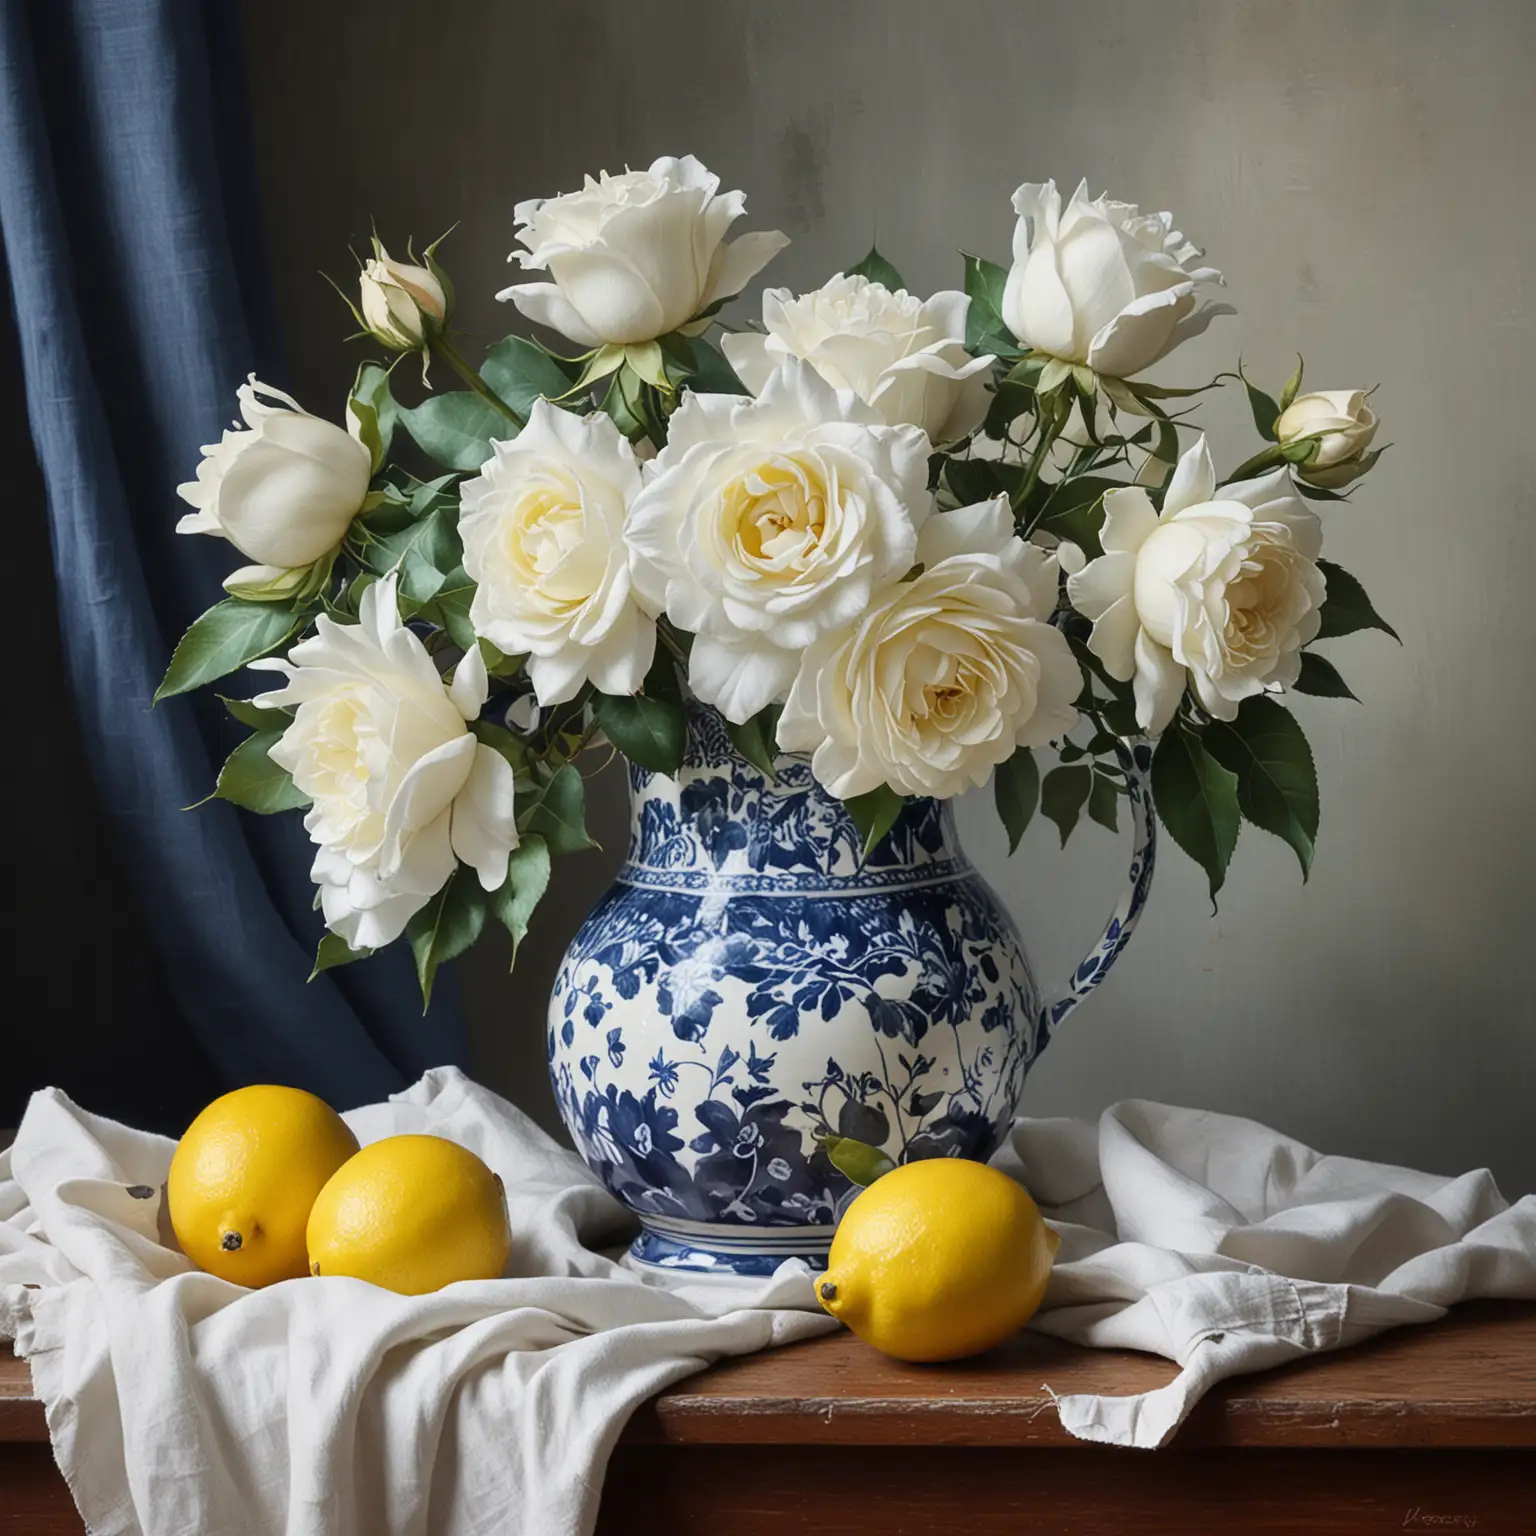 Classic Still Life Painting Blue and White Pitcher with White Roses Lemons and Cloth